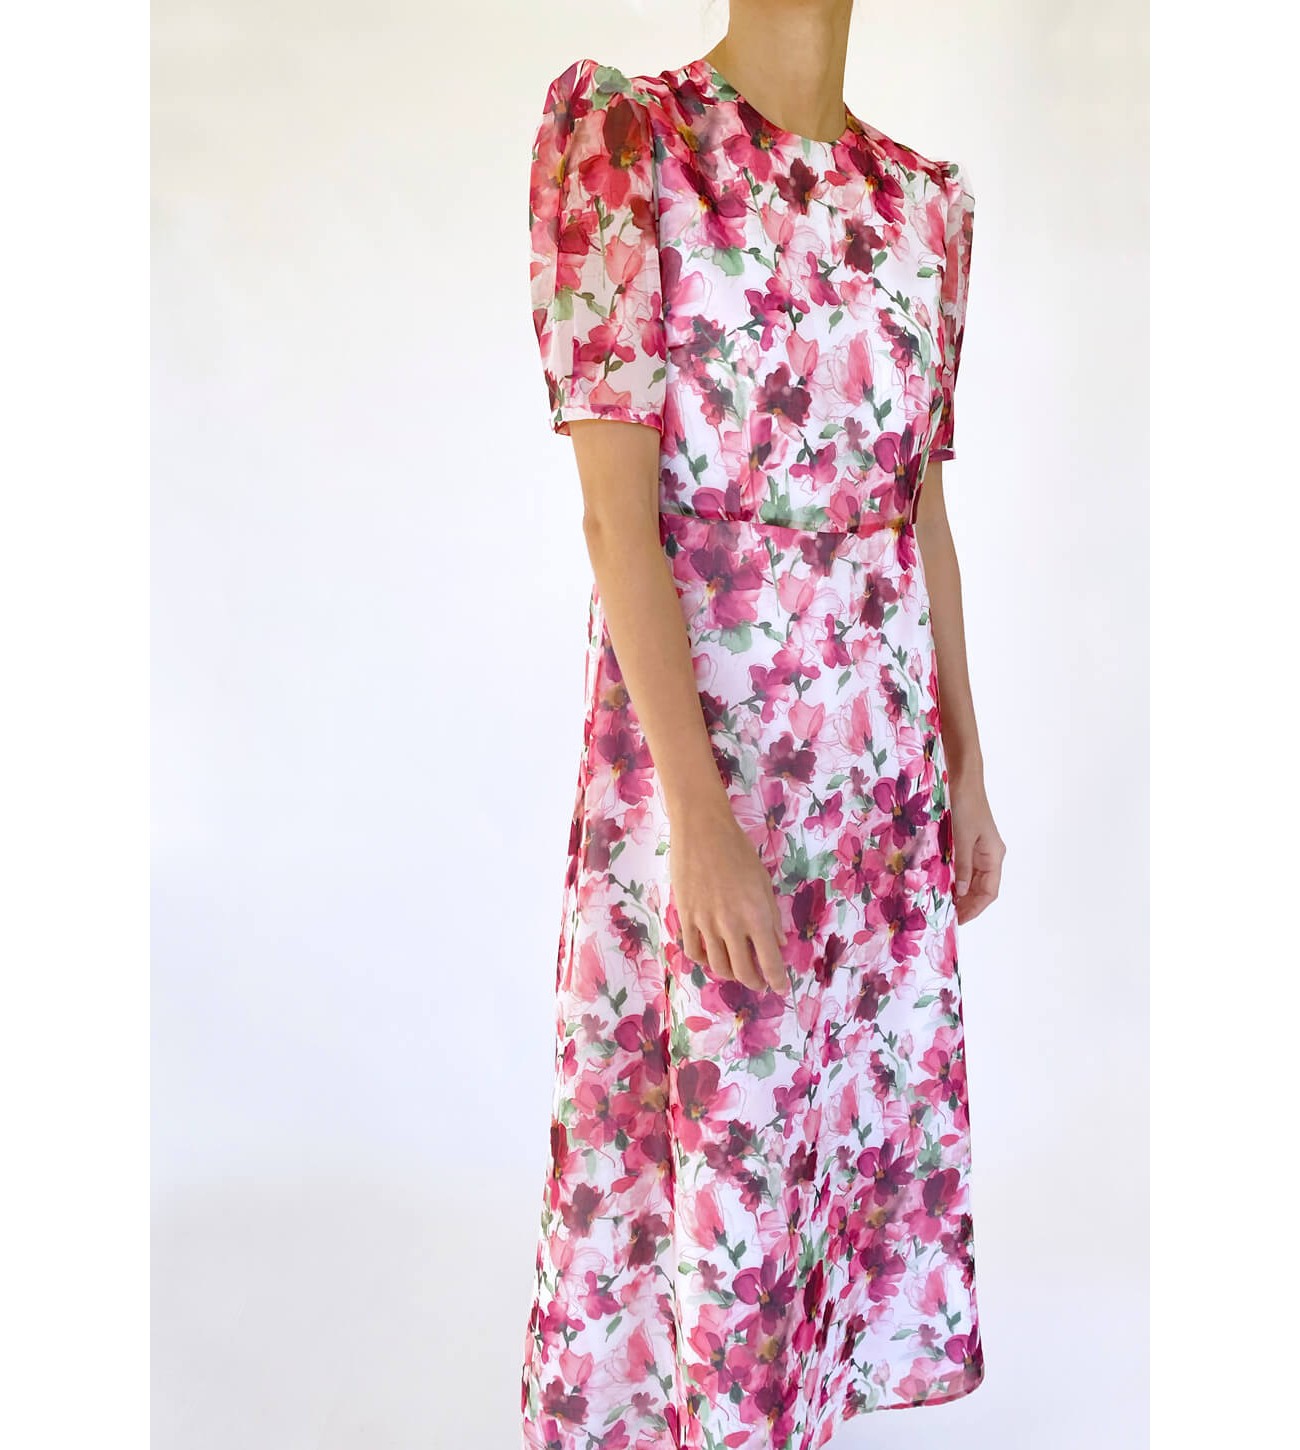 MARIONA_MIDI_PRINT_DRESS_WITH_BALLOON_SLEEVES_MARIONA_FASHION_CLOTHING_WOMAN_SHOP_ONLINE_4104H